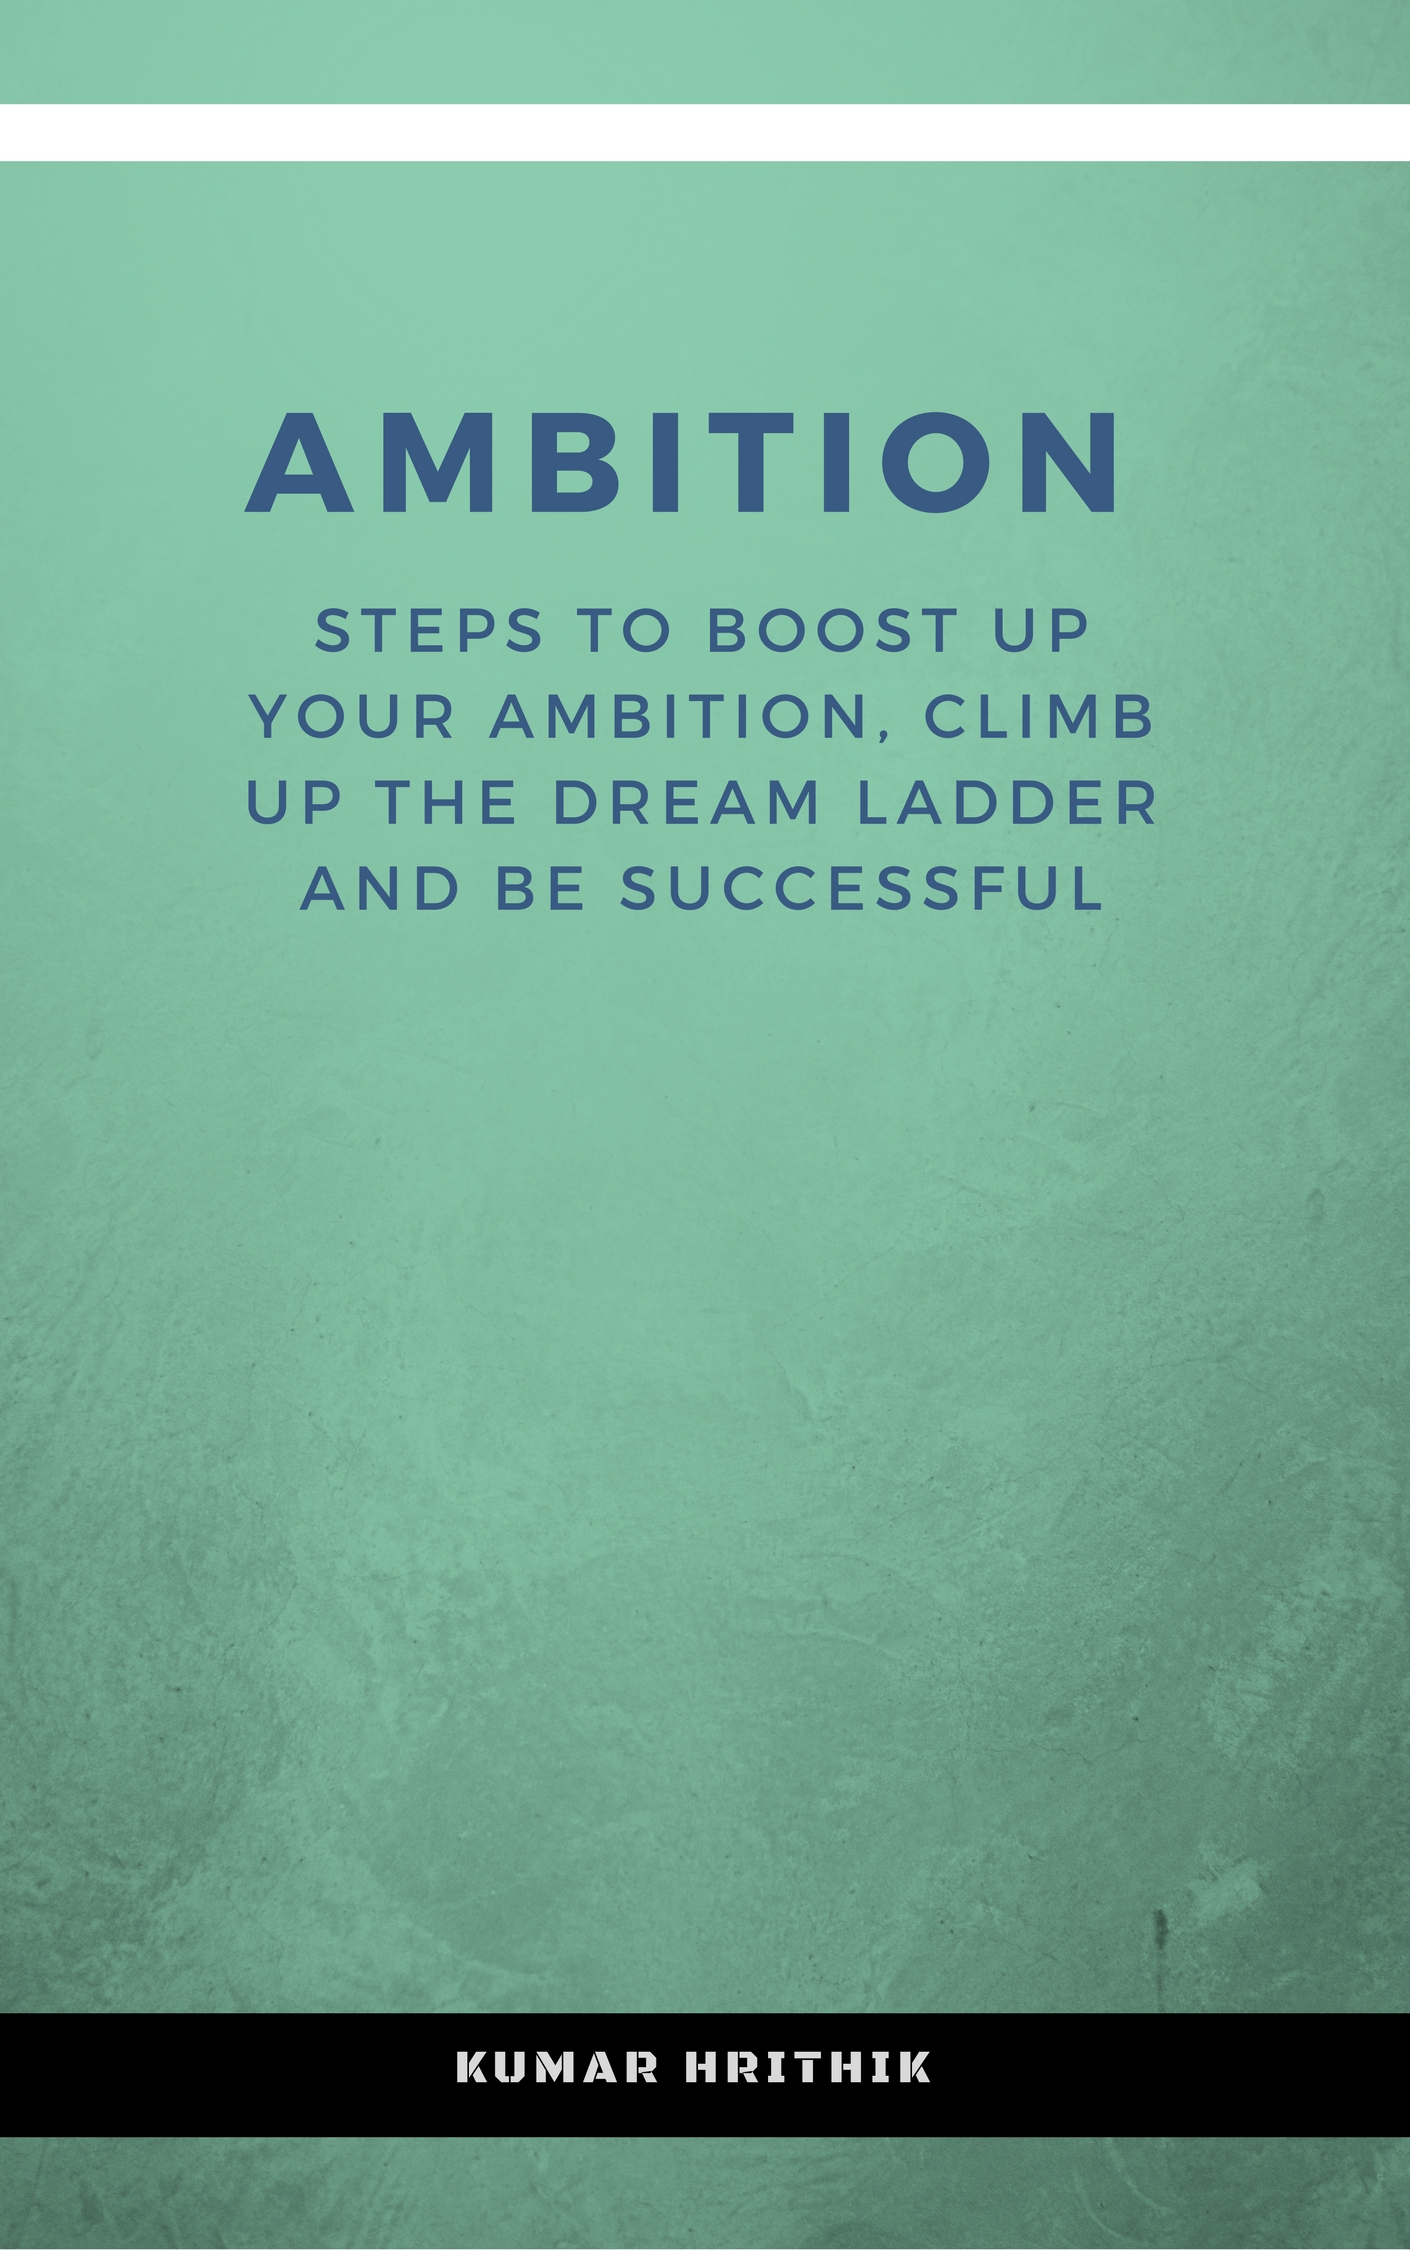 FREE: Ambition: Steps to boost up your ambition, climb up the dream ladder and be successful: self help motivation guide by Kumar Hrithik